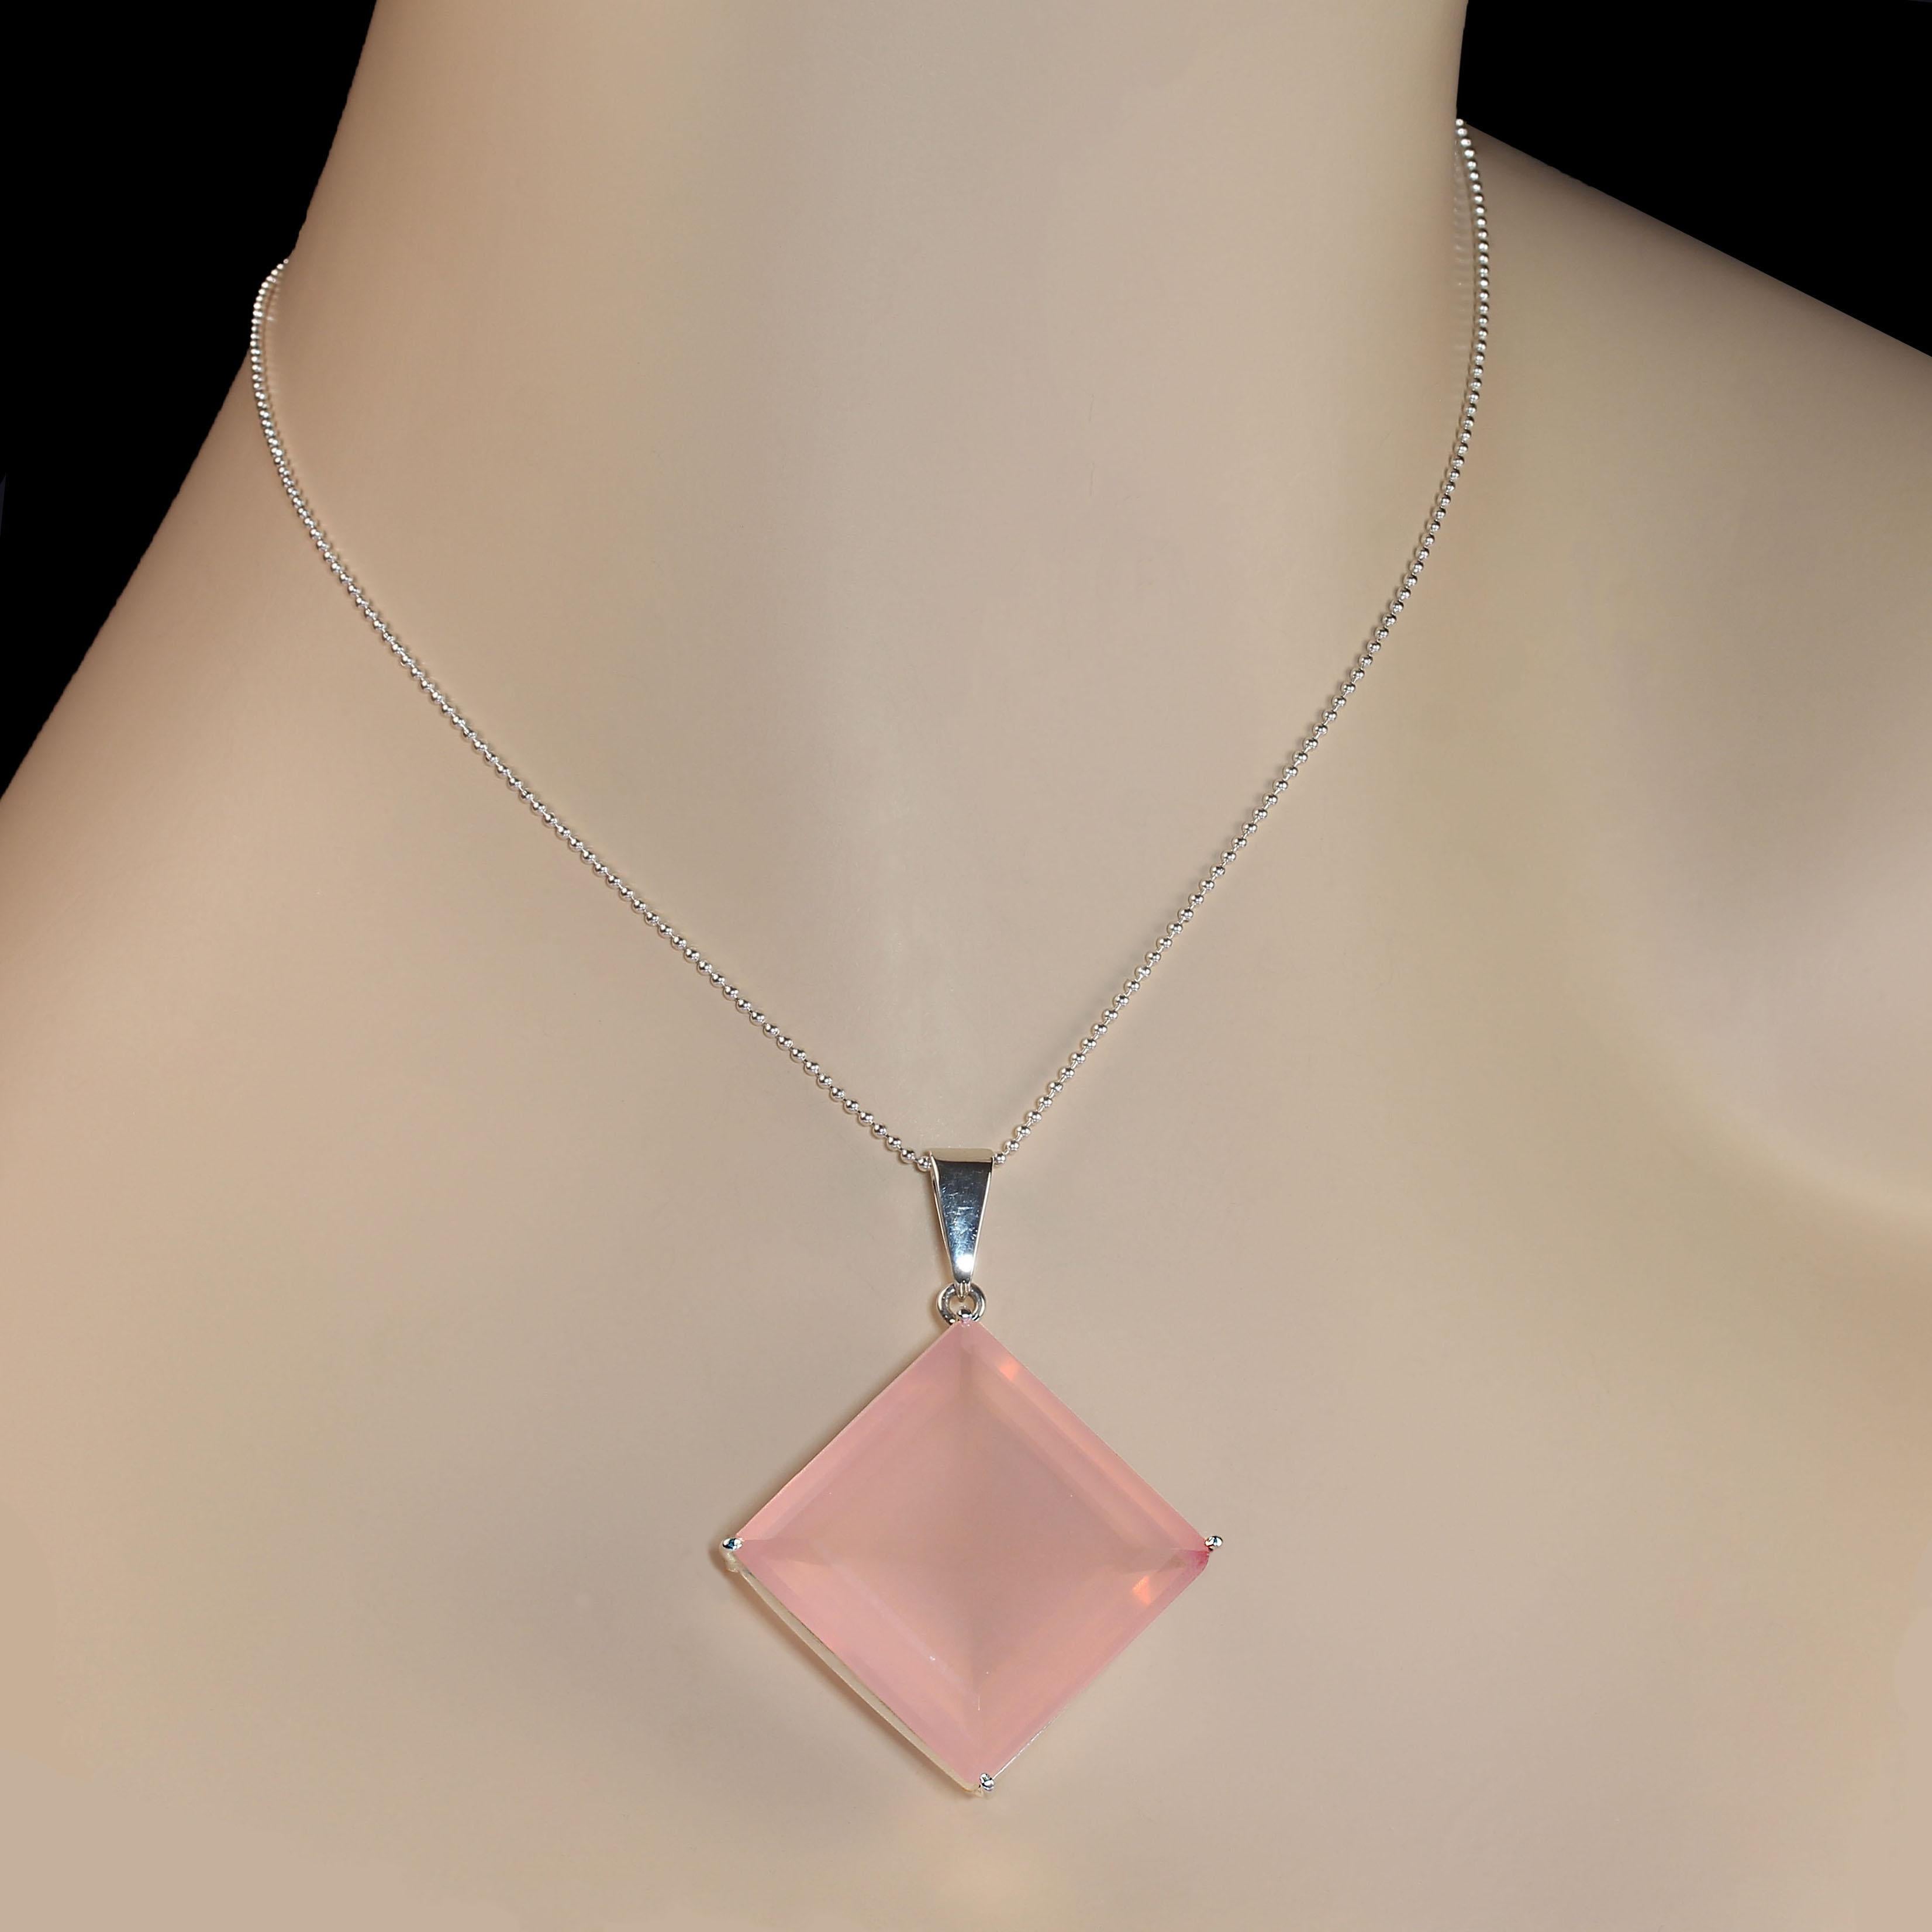 Over an inch square this  Rose Quartz and Sterling Silver Pendant is truly stunning.  The gemstone is 69Ct and set in a handmade Sterling Silver setting. This unique Rose Quartz pendant comes with its own 18 inch Sterling Silver chain. You will love